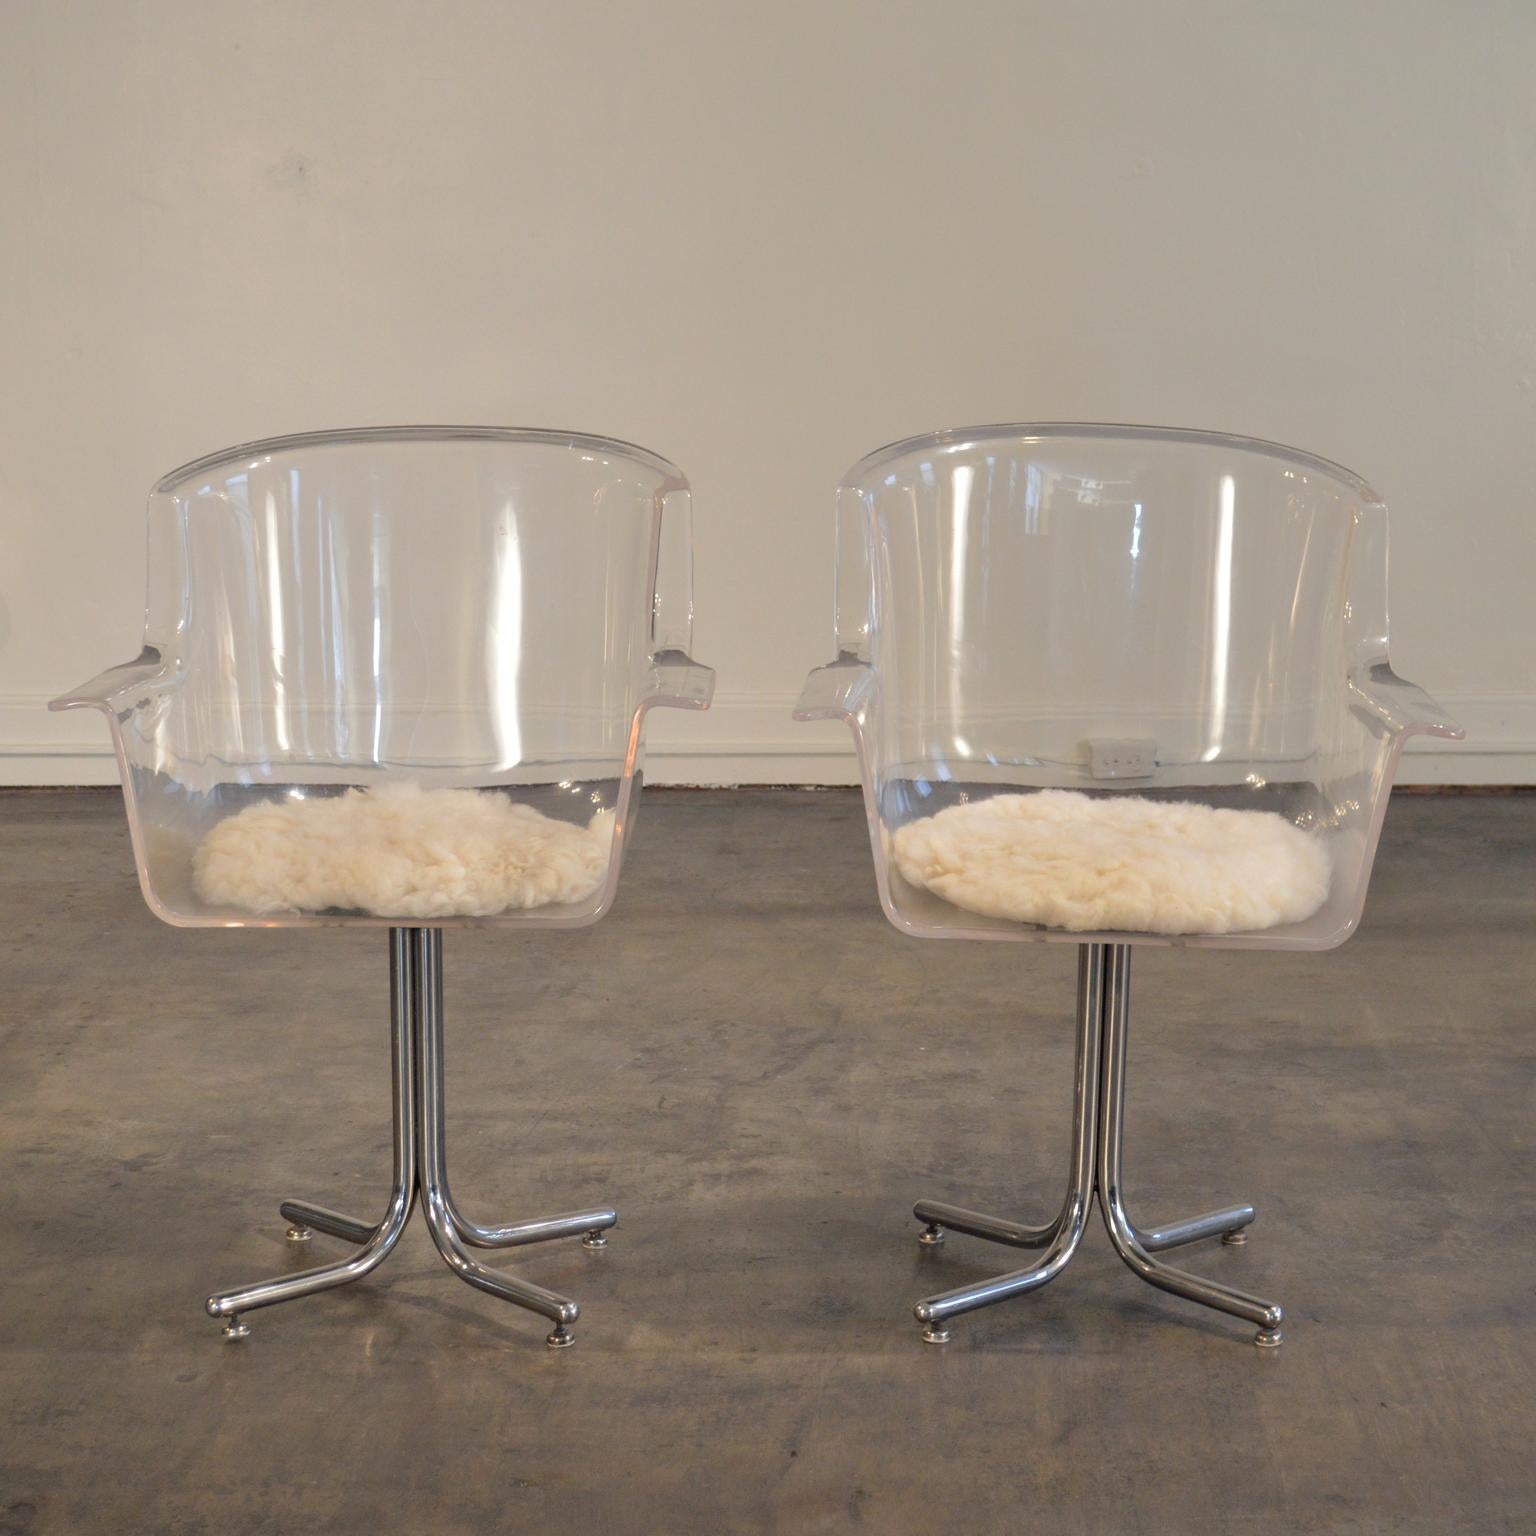 Molded Lucite swivel chairs on bases of tubular chromed steel, designed by Leon Rosen for Pace circa 1960. The deceptively simple form of the Lucite chair offers comfort and style in a multitude of settings. 

The swivel mechanisms and chromed